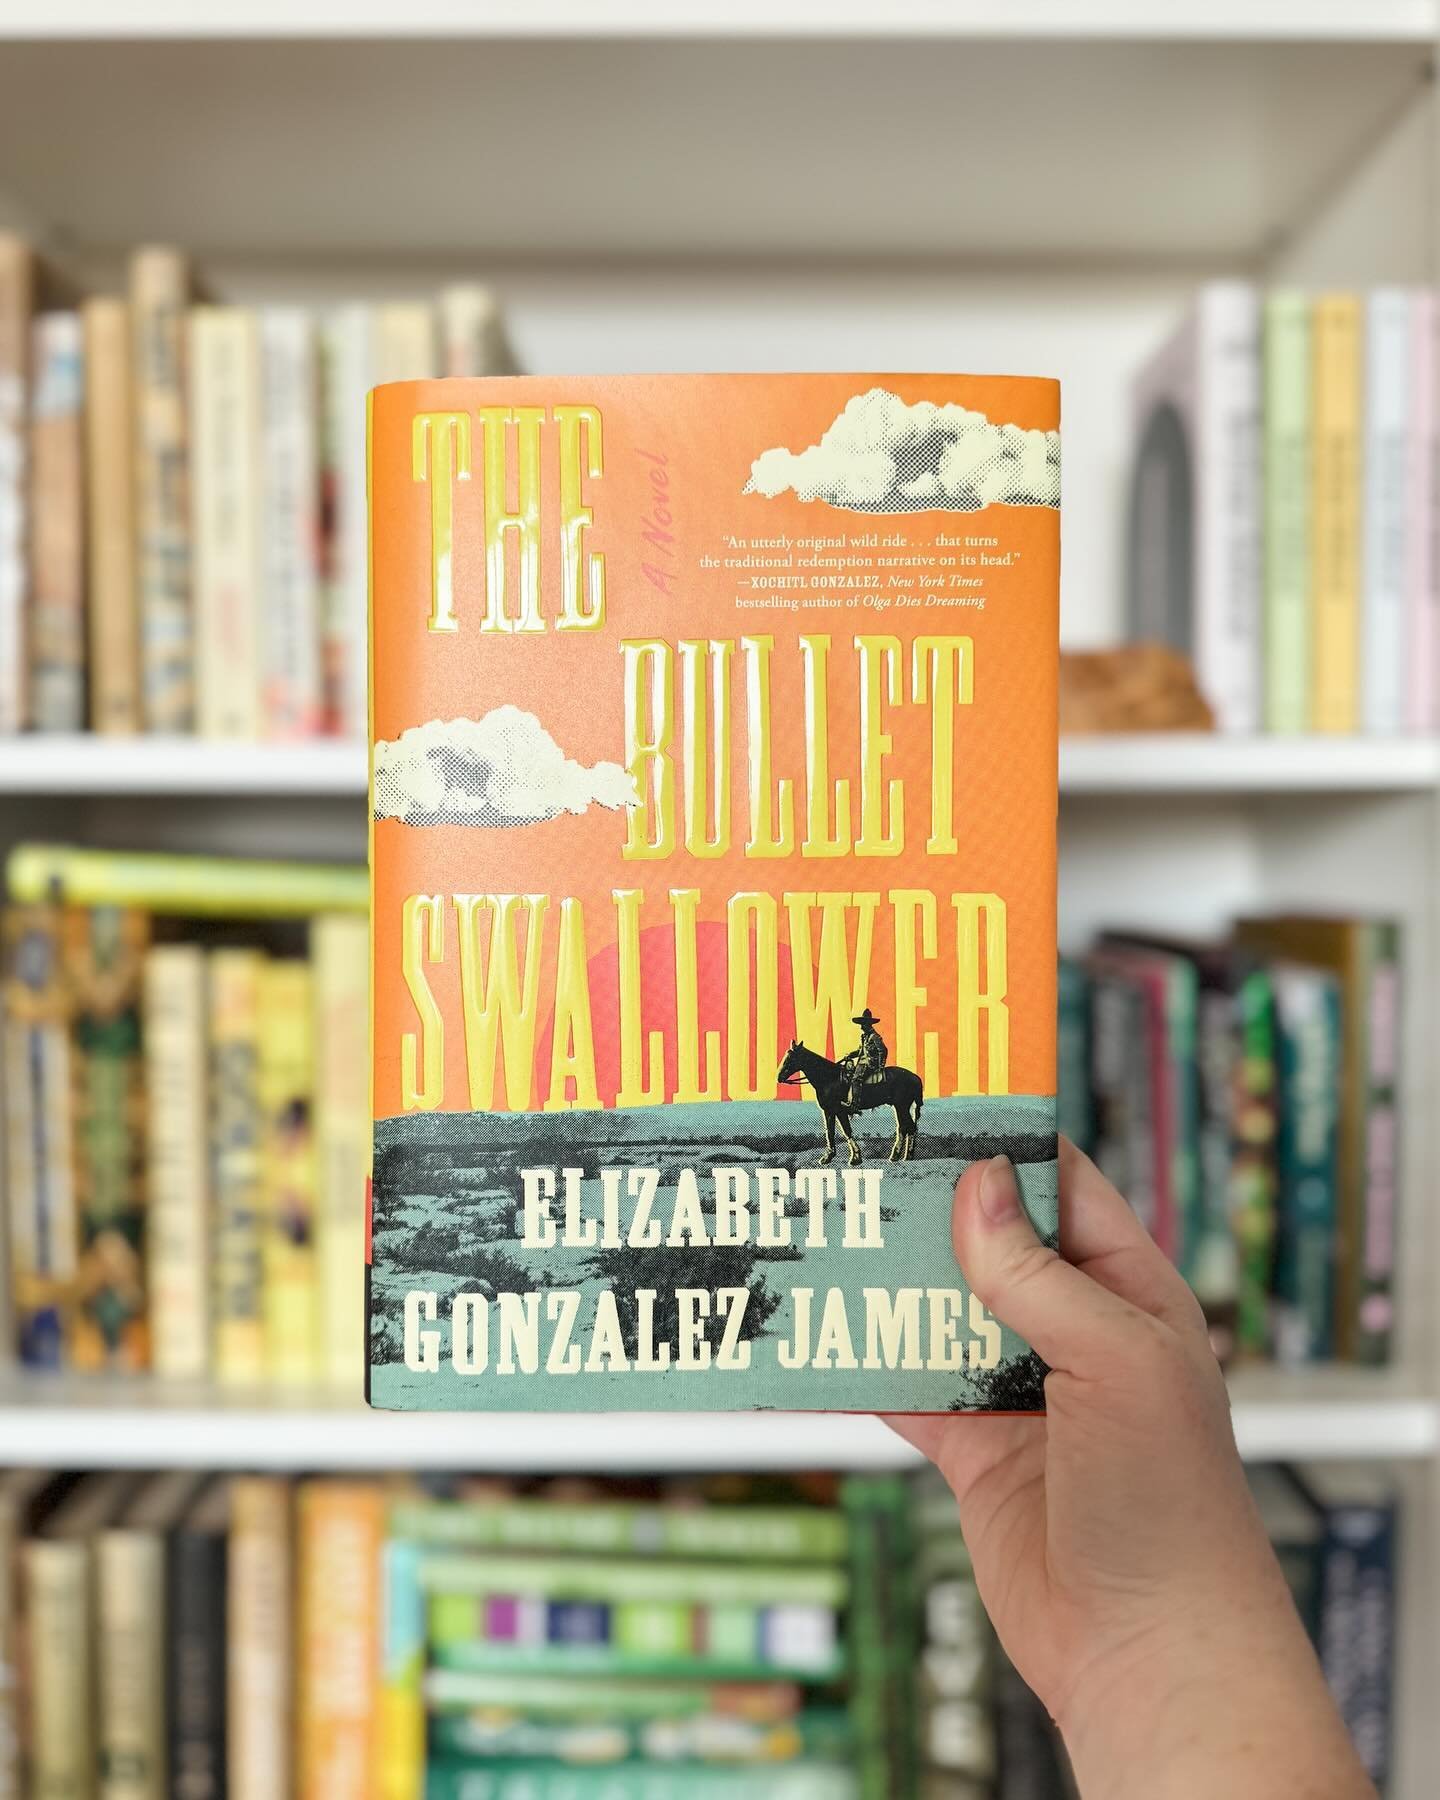 What a genre-mashup delight this book was! Part antihero western, part dual-timeline family saga, with a sprinkling of magical realism (including a very mysterious book), The Bullet Swallower has something for everyone. (TY @simonbooks for the copy!)